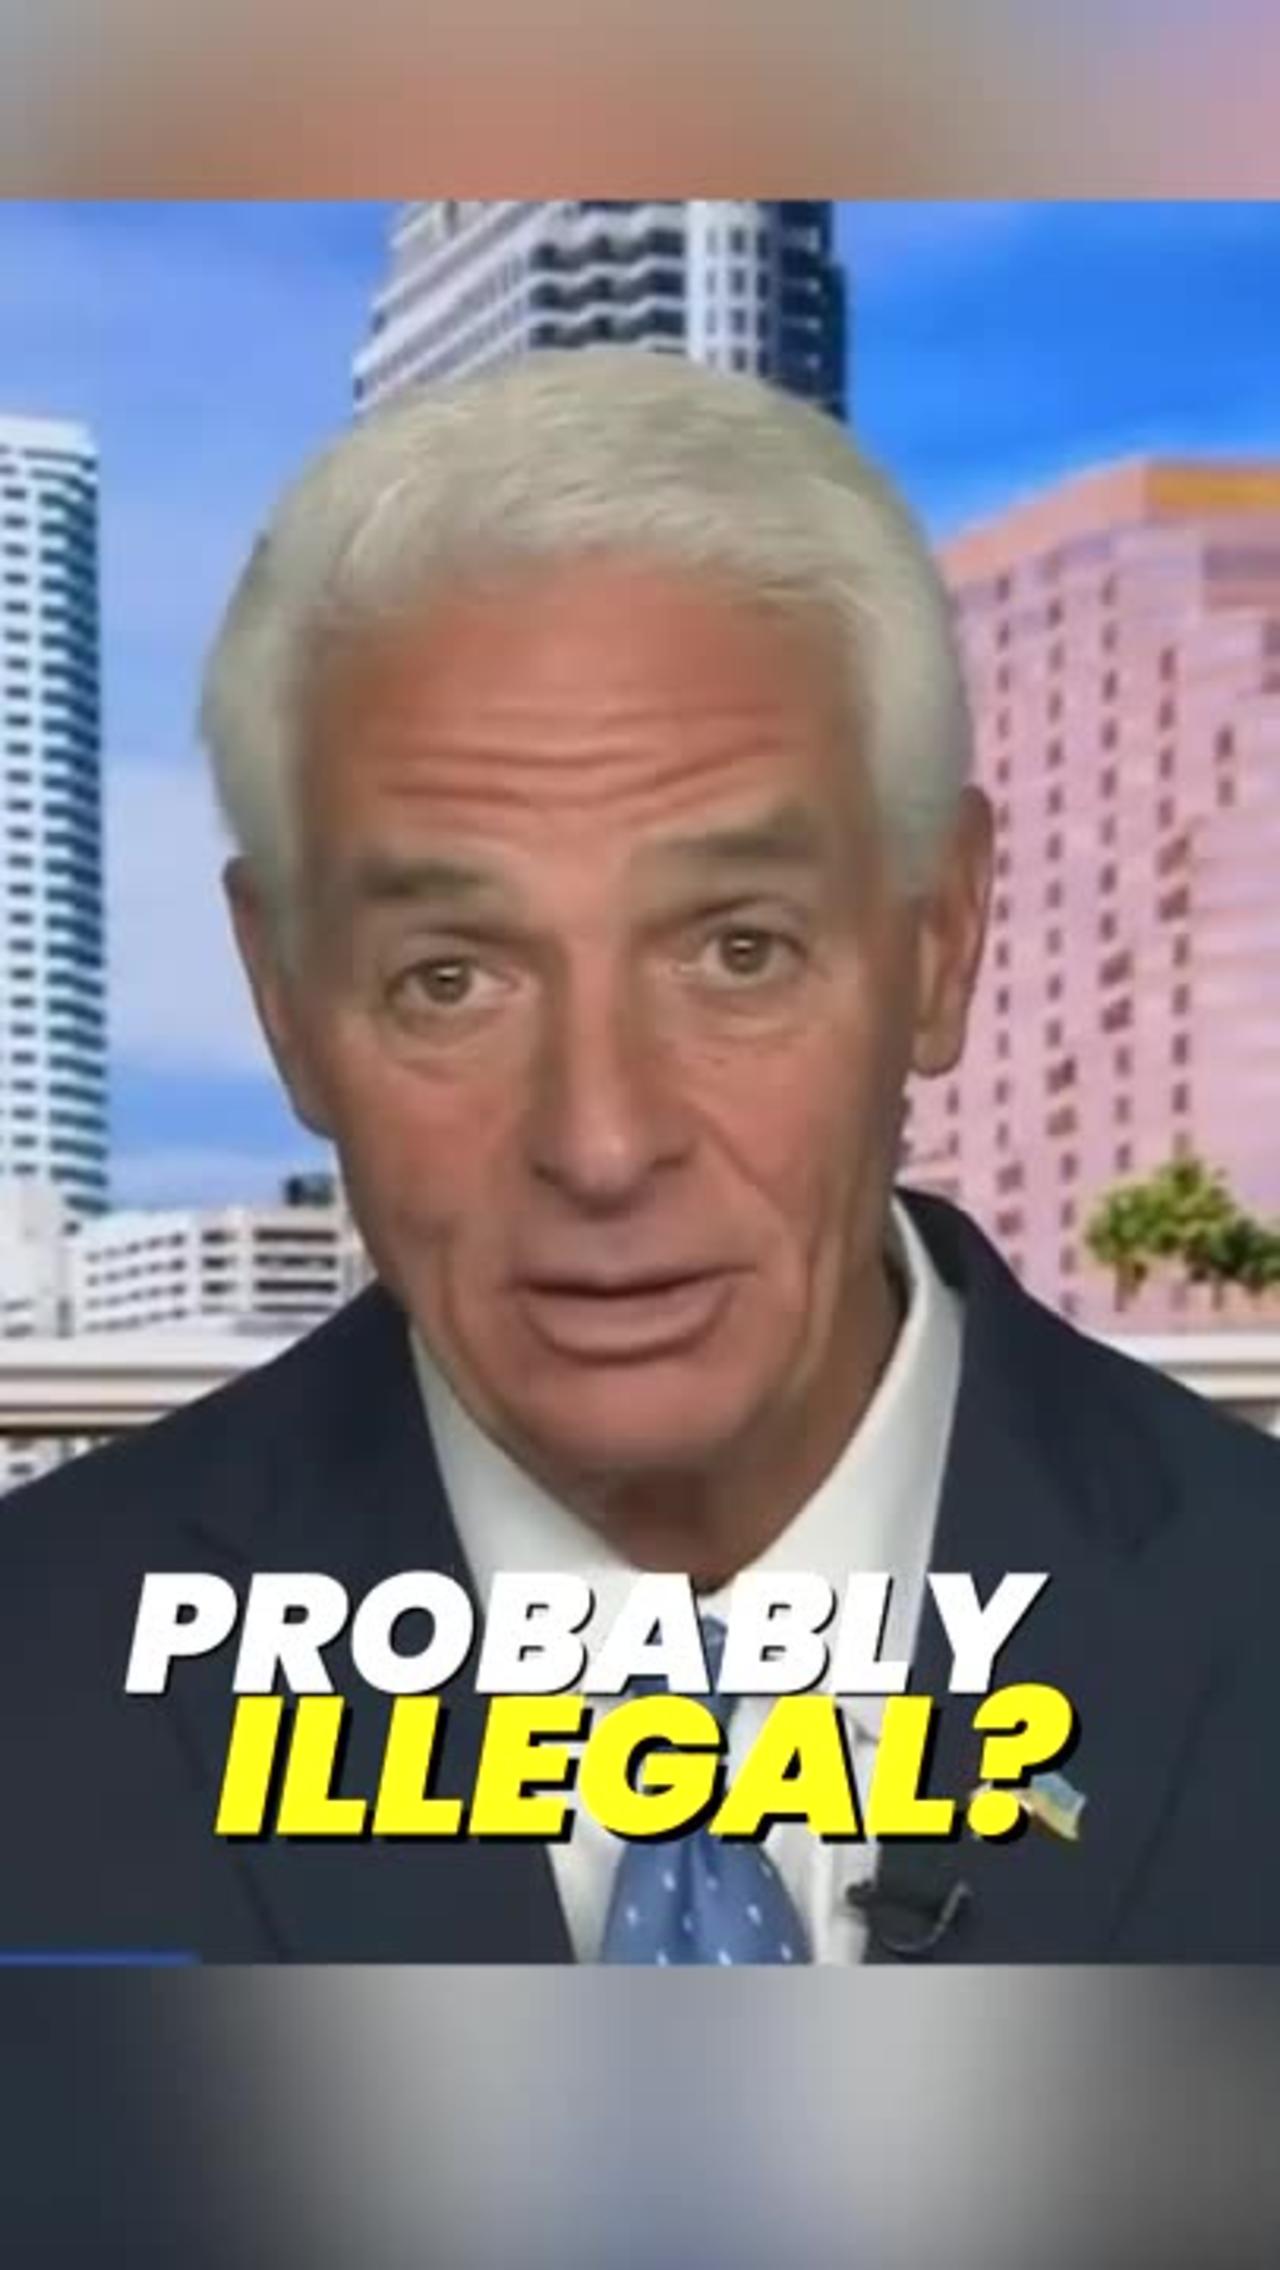 charlie-crist-s-desperate-need-for-relevancy-is